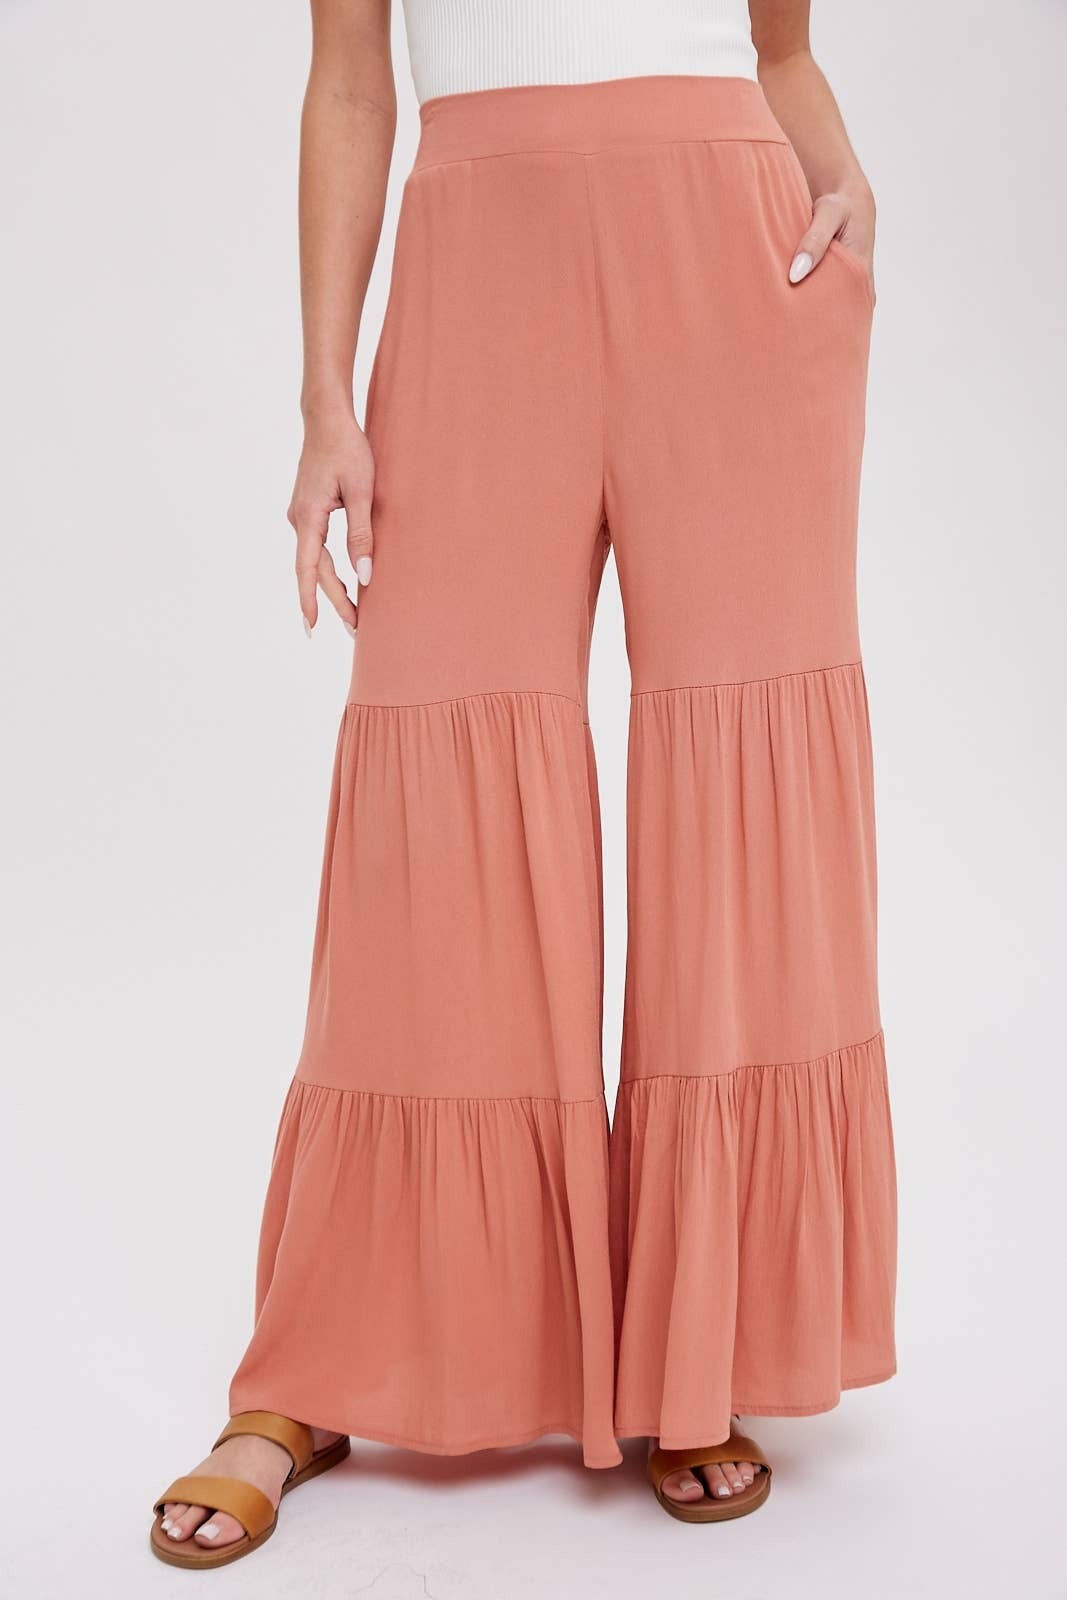 RAYON 16kg Ladies Ruffle Palazzo Pants, Size : 20-40, Feature :  Anti-Wrinkle, Comfortable, Dry Cleaning at Rs 250 / Piece in Delhi